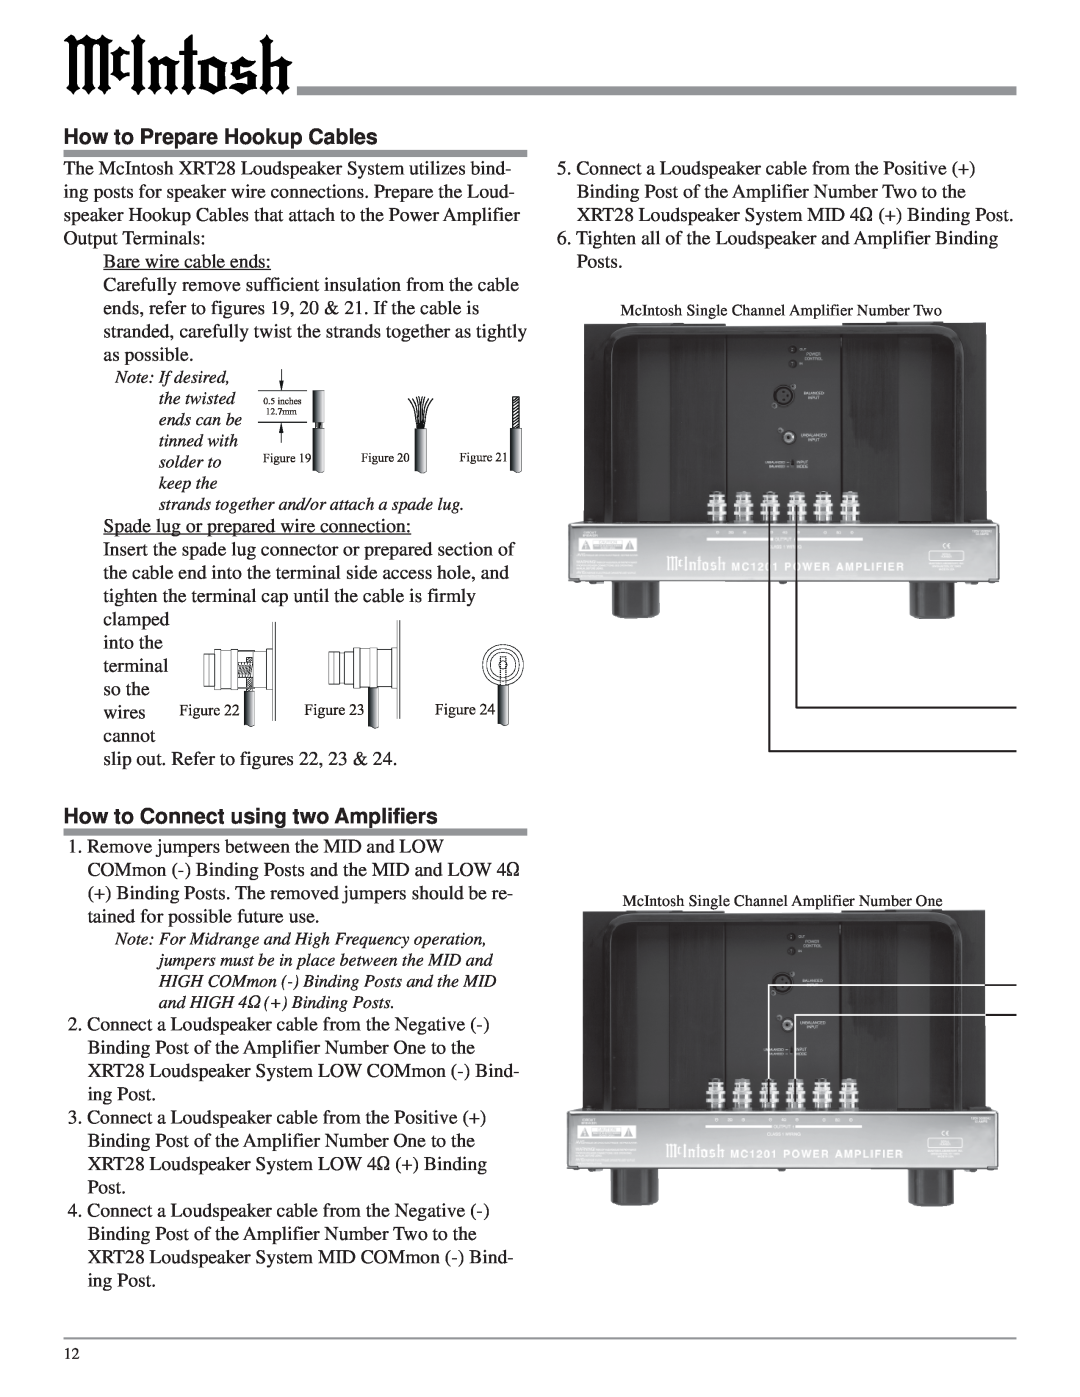 McIntosh XRT28 owner manual How to Connect using two Amplifiers, How to Prepare Hookup Cables 